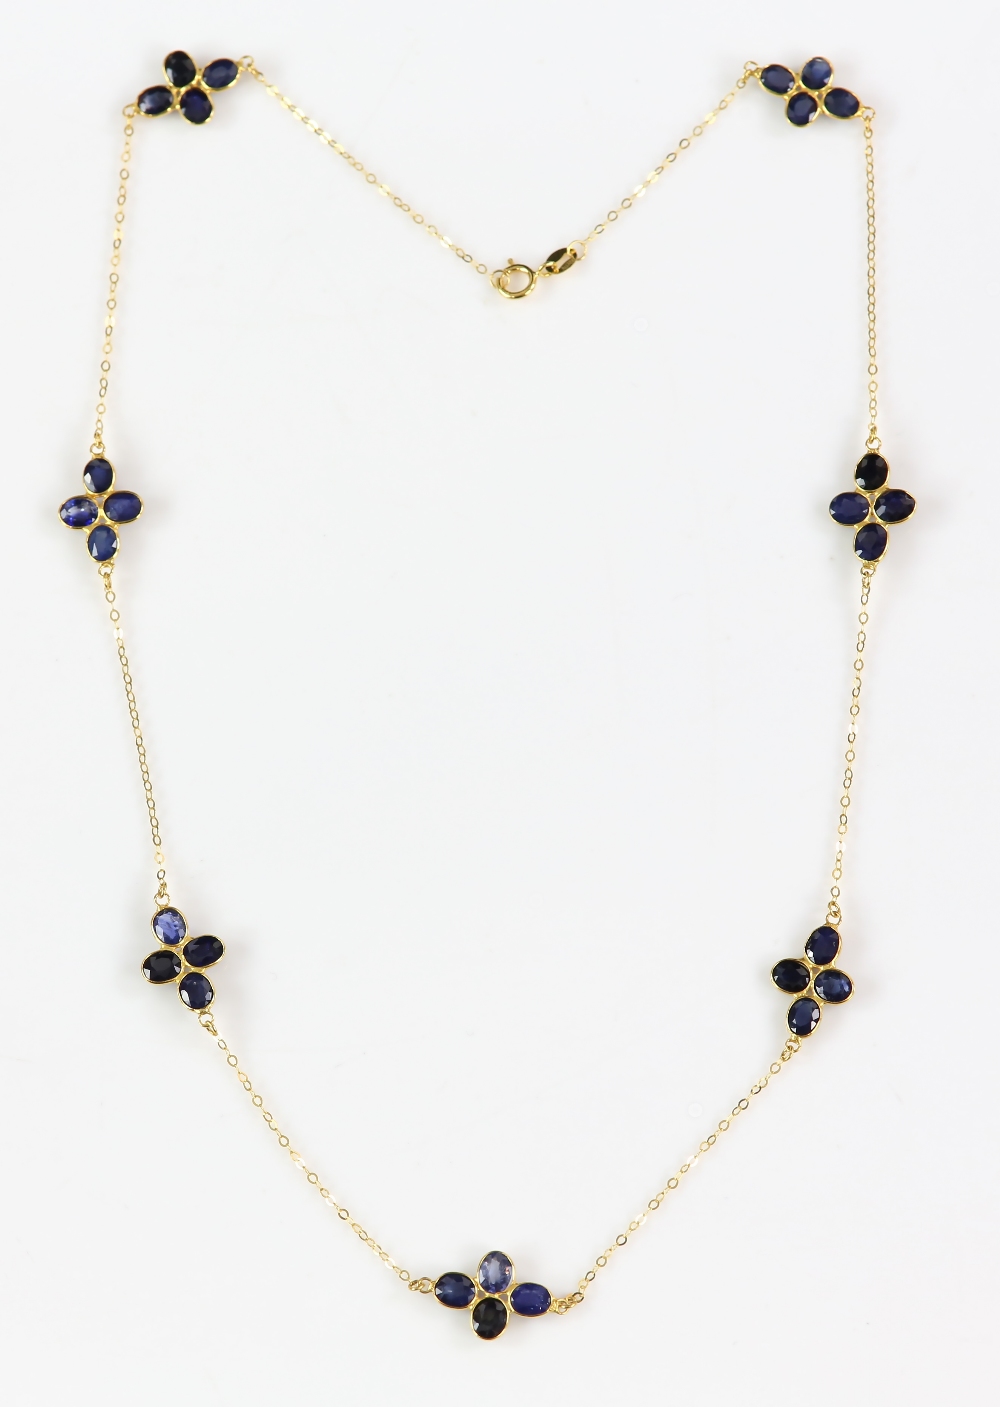 Sapphire cluster necklace; seven clusters of four oval faceted sapphires in floral formation - Image 2 of 8